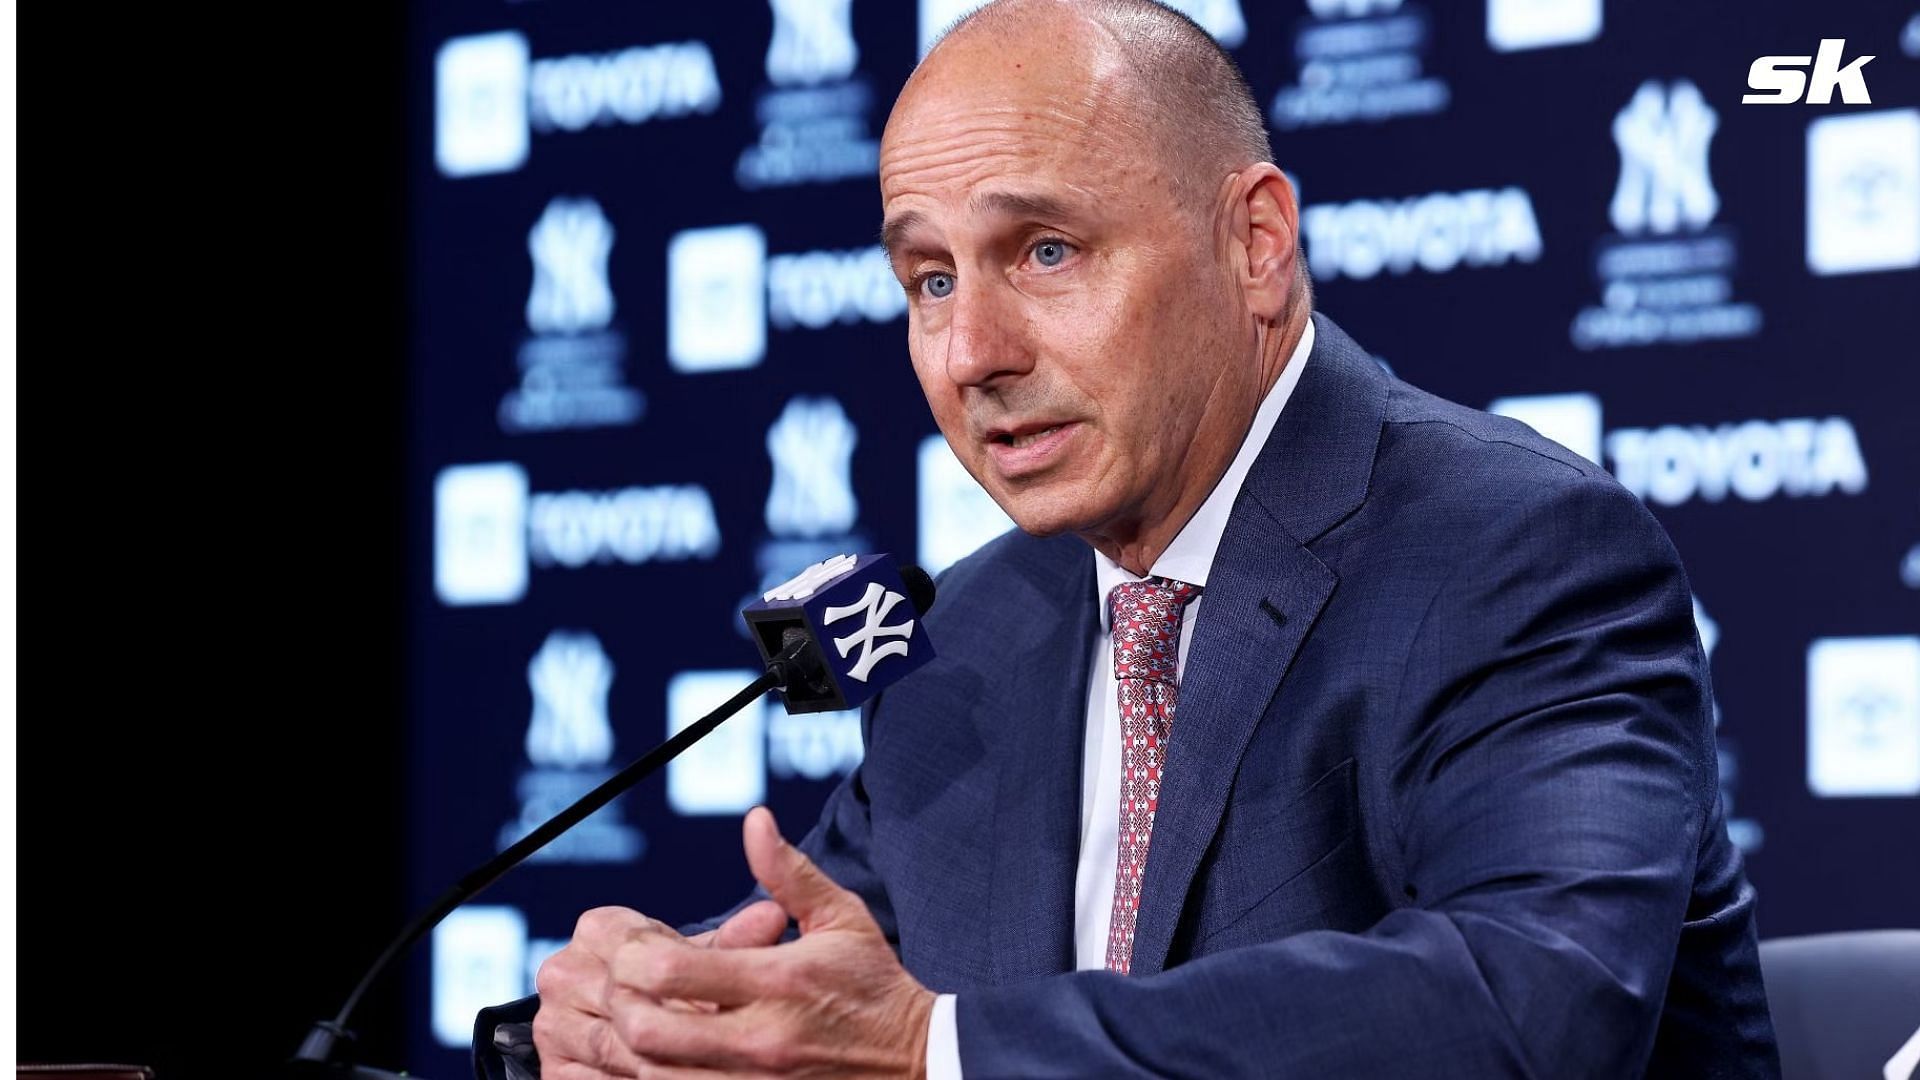 GM Brian Cashman addressed the need of keeping things light in highly stressful MLB environment